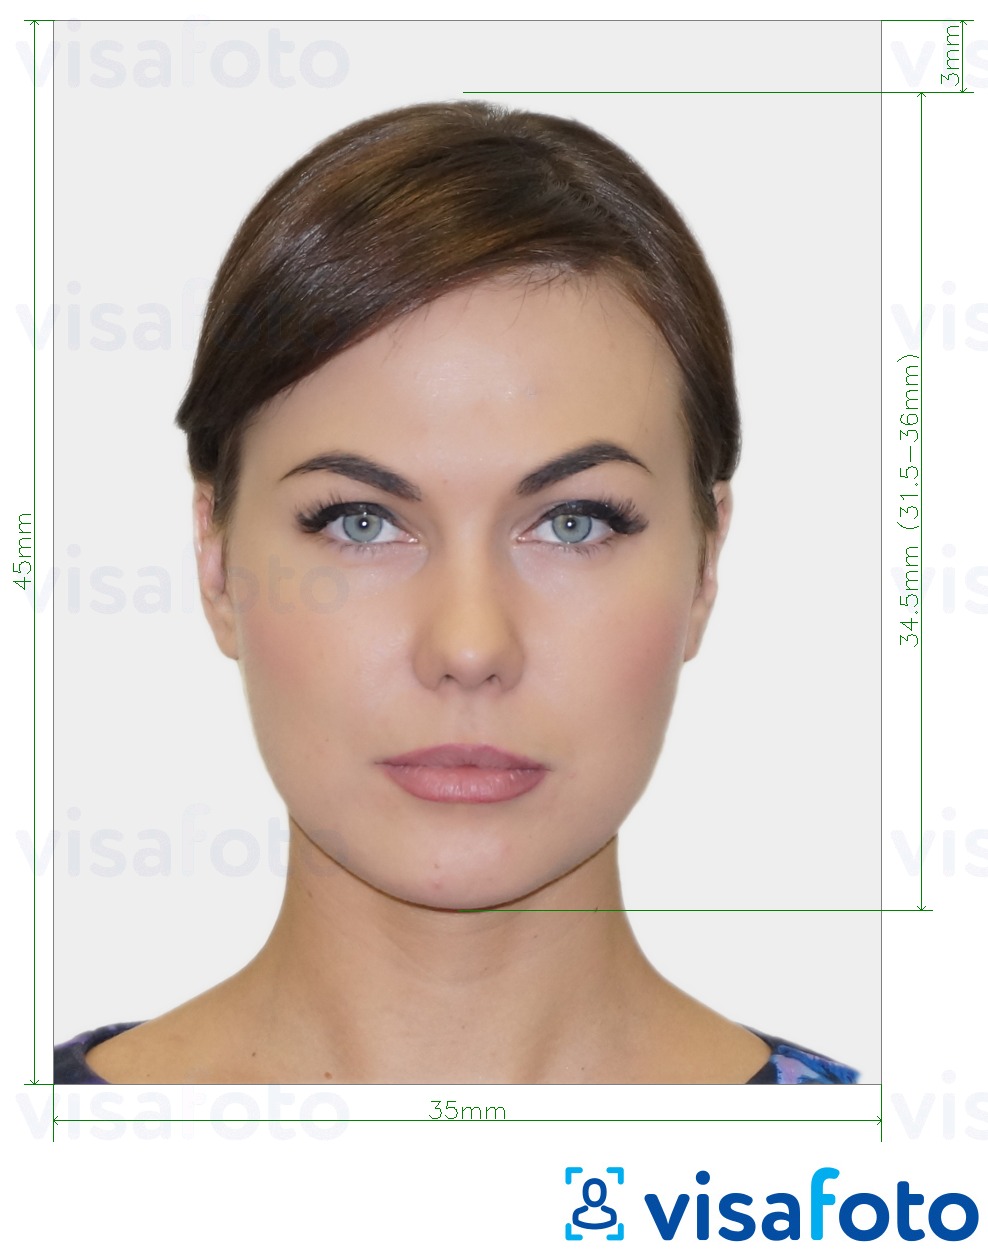 Example of photo for Portugal visa online with exact size specification